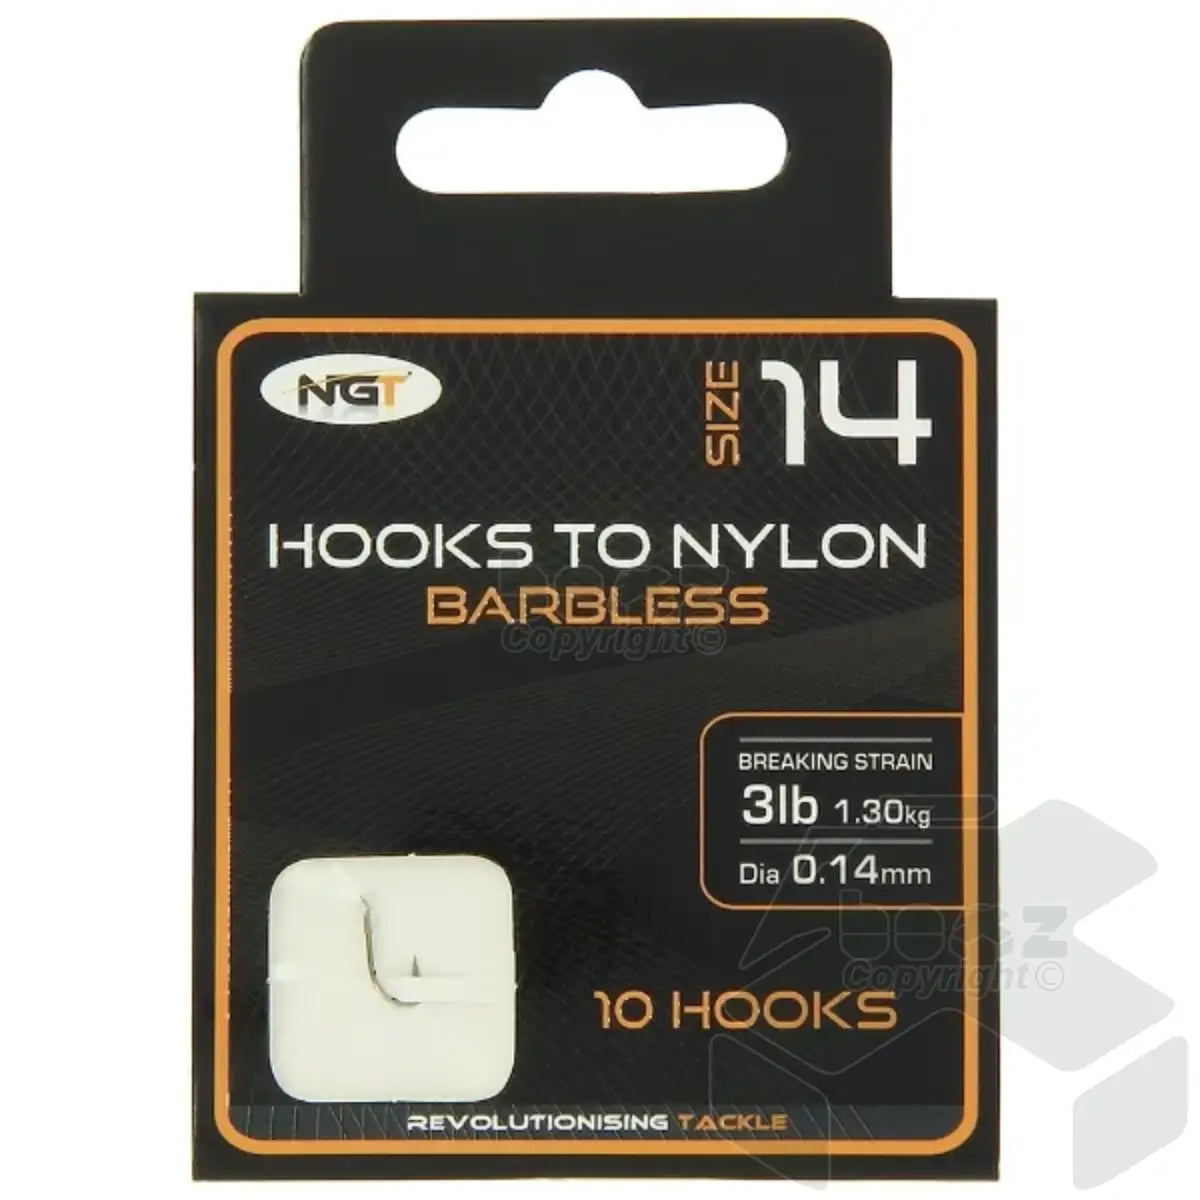 NGT 10 Barbless Hooks To Nylon - Size 14